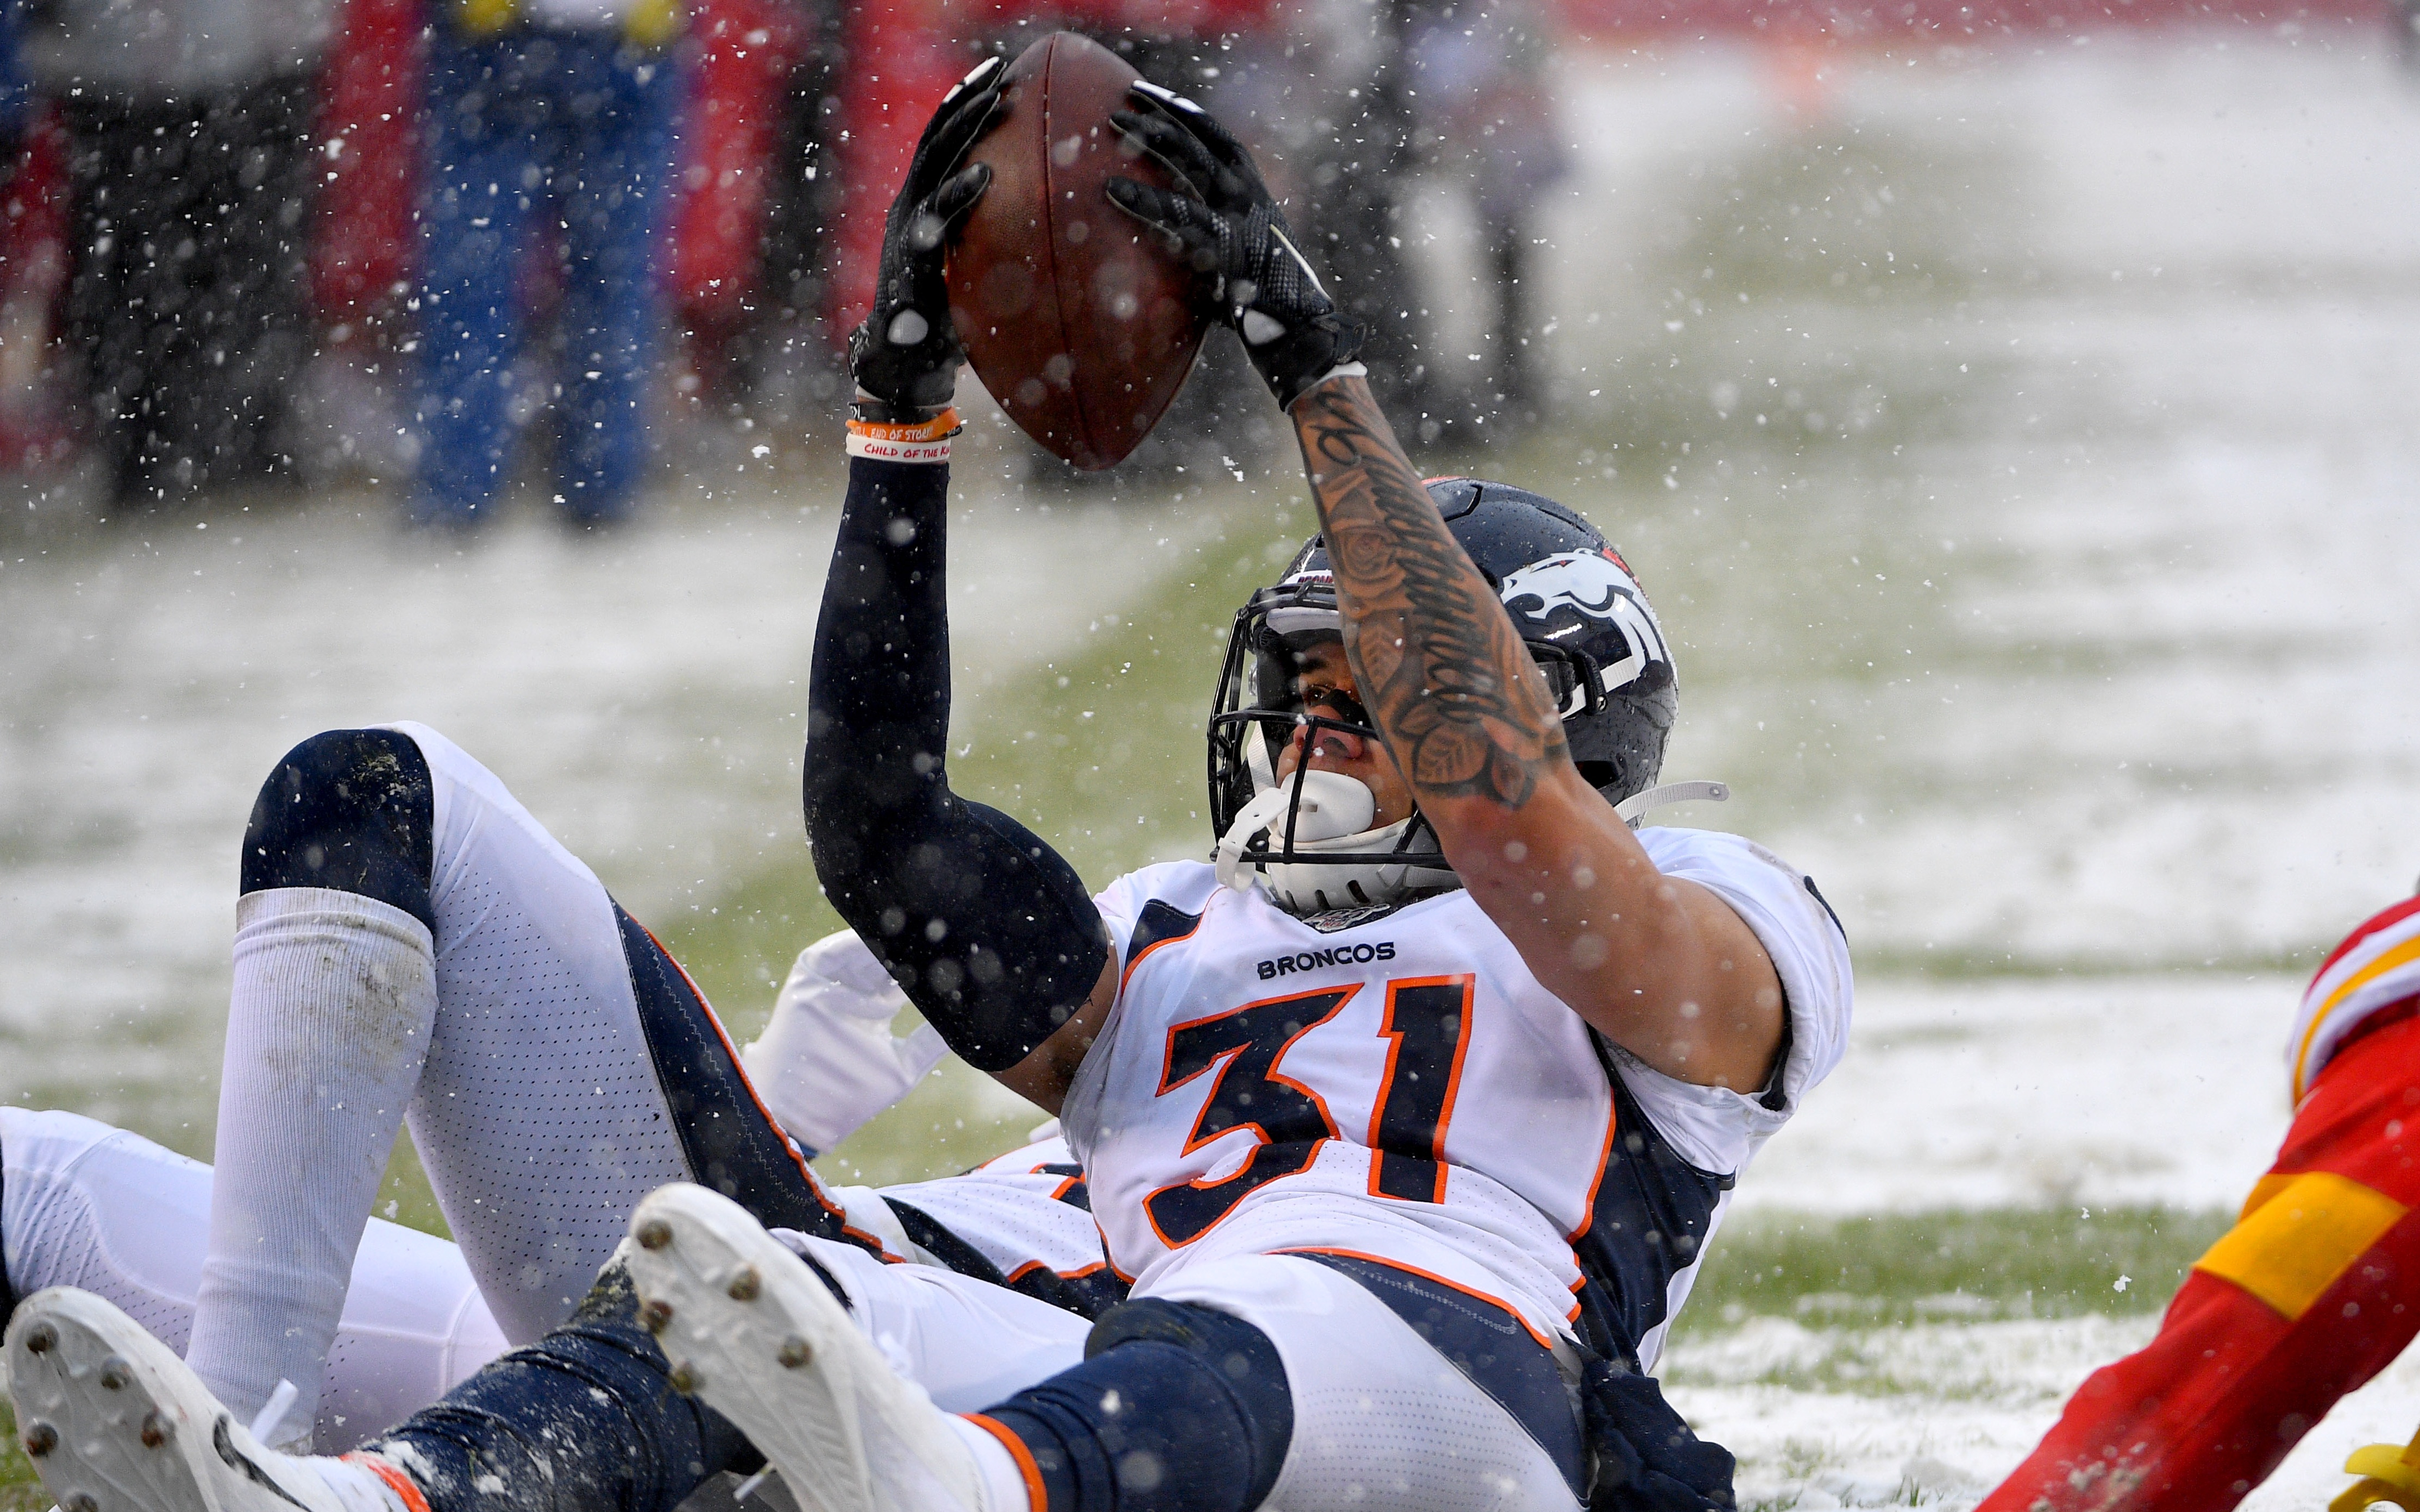 Justin Simmons' incredible interception against Kansas City in the snow last week. Credit: Denny Medley, USA TODAY Sports.